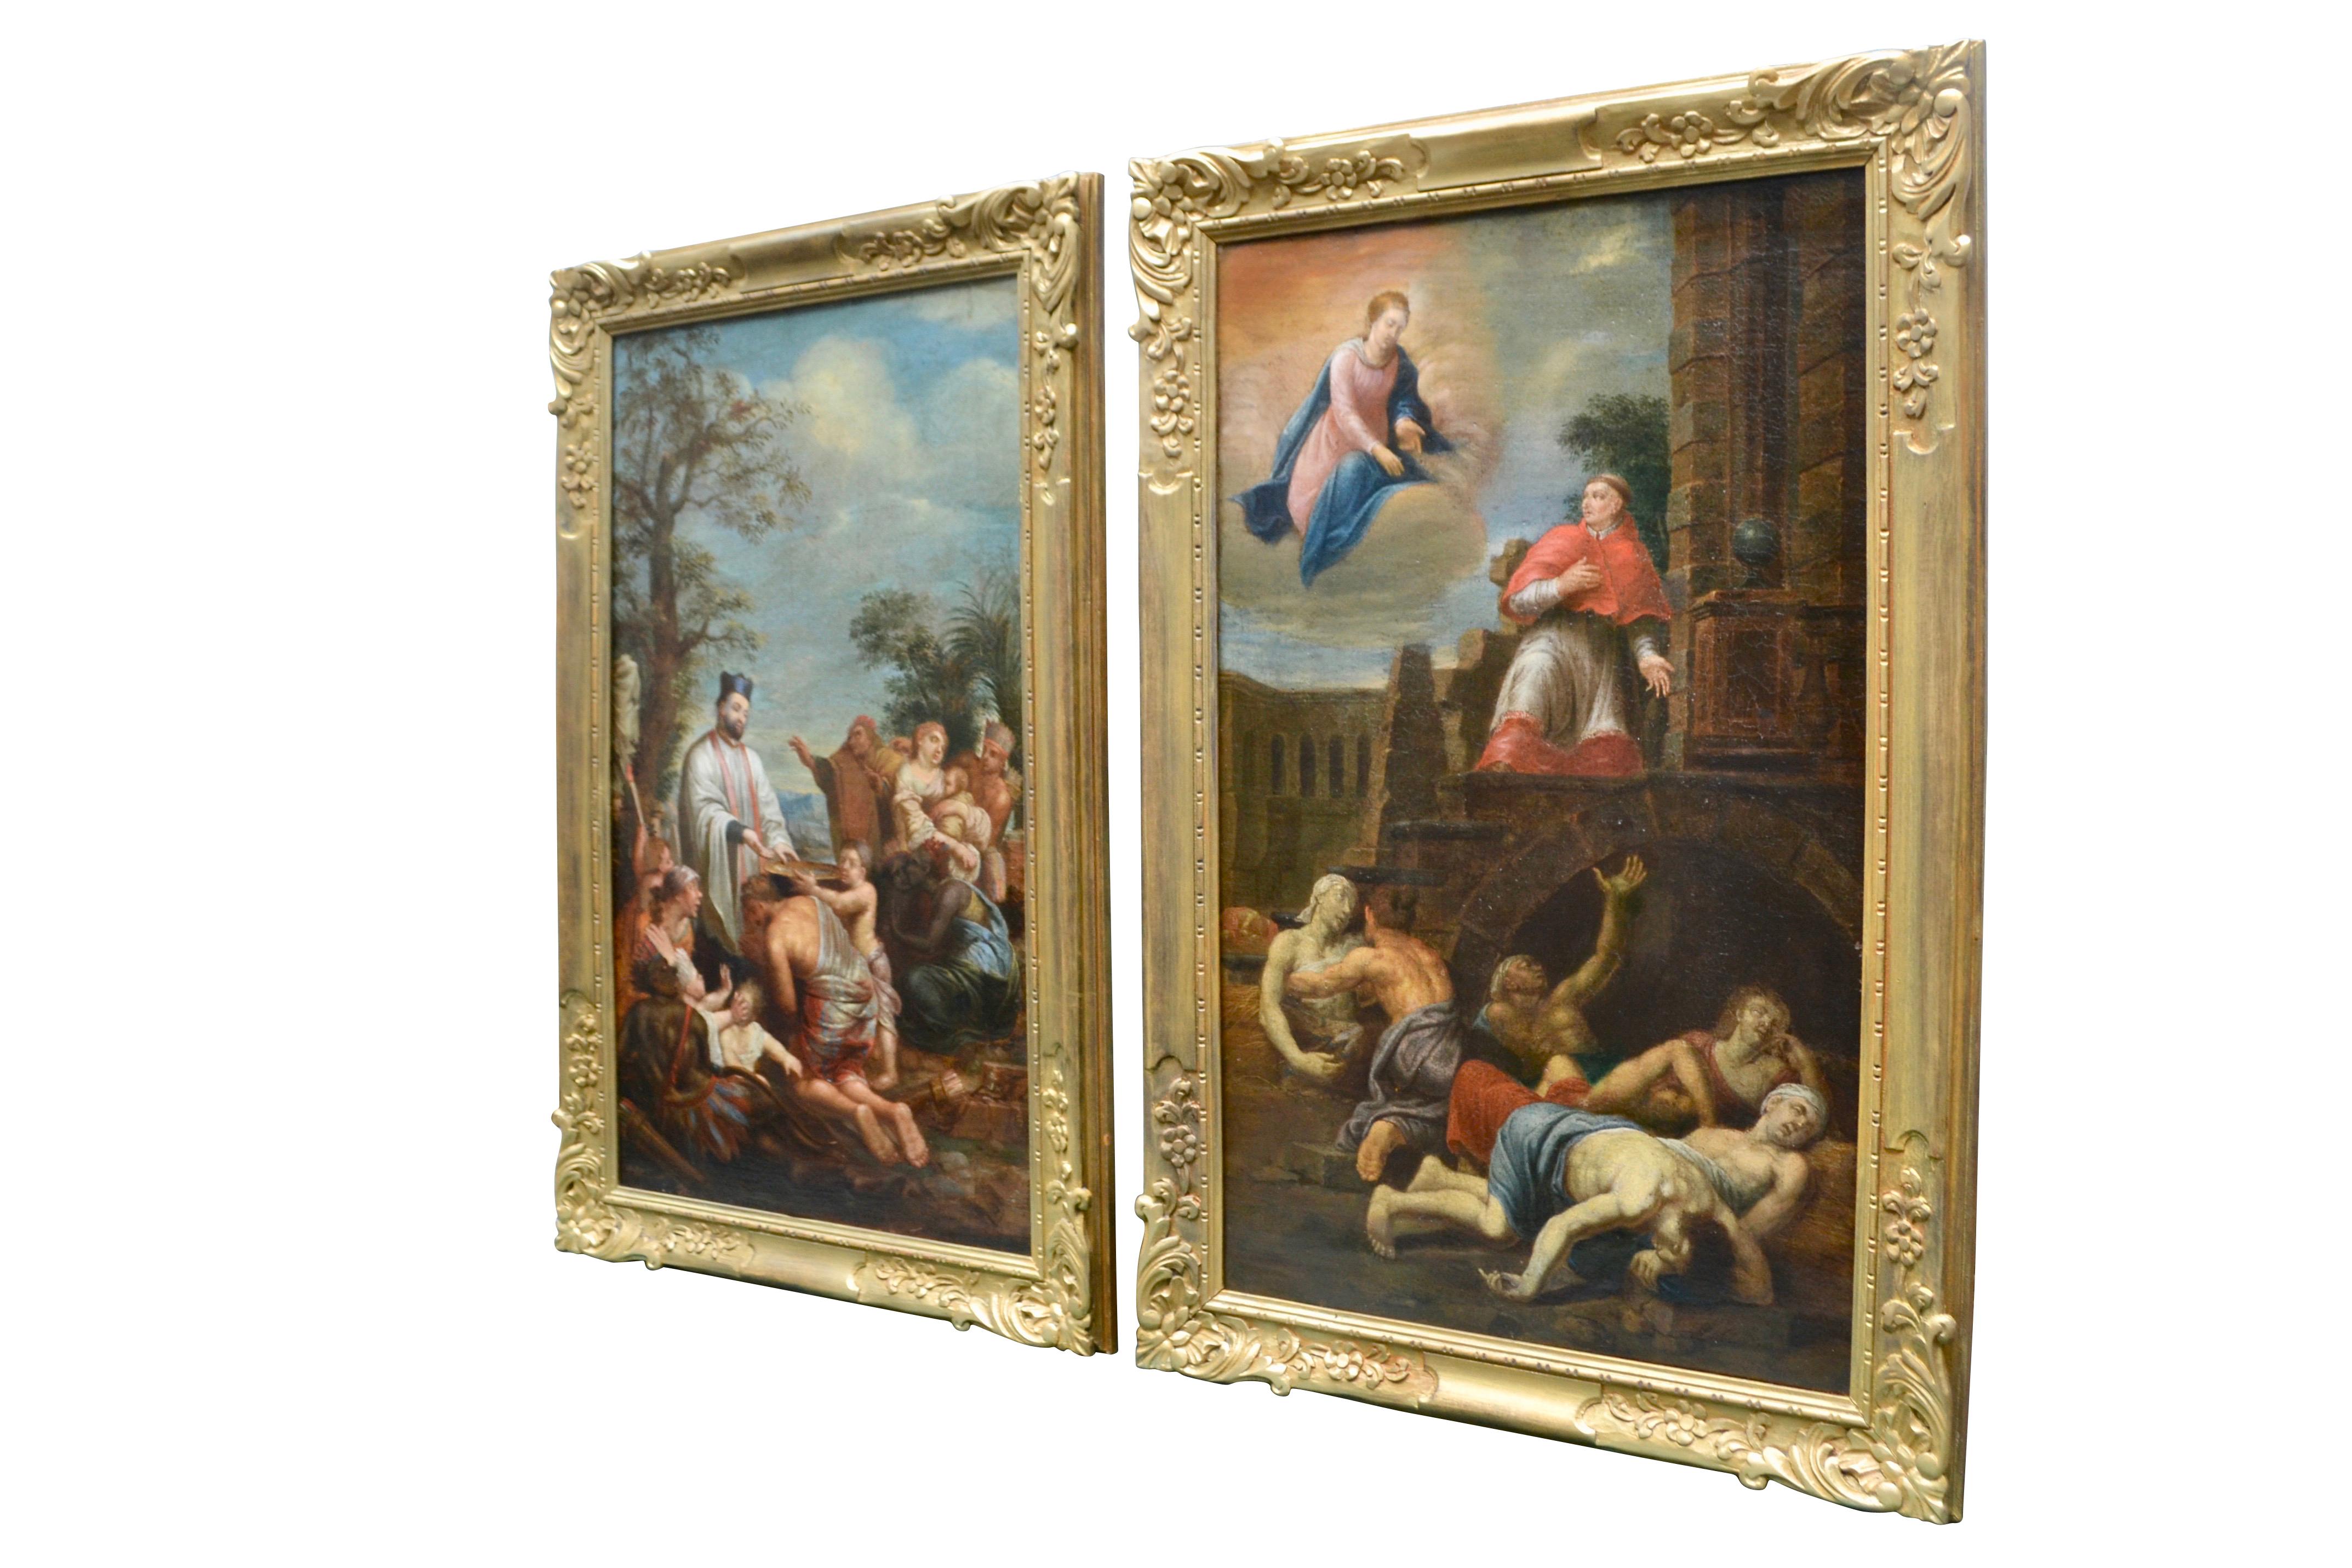 A beautifully executed and rare complementary pair of oil on canvas paintings depicting two of the moist famous and important counter reformation catholic saints St Francis Xavier and St Carlo Borromeo shown in scenes of what the respective saints